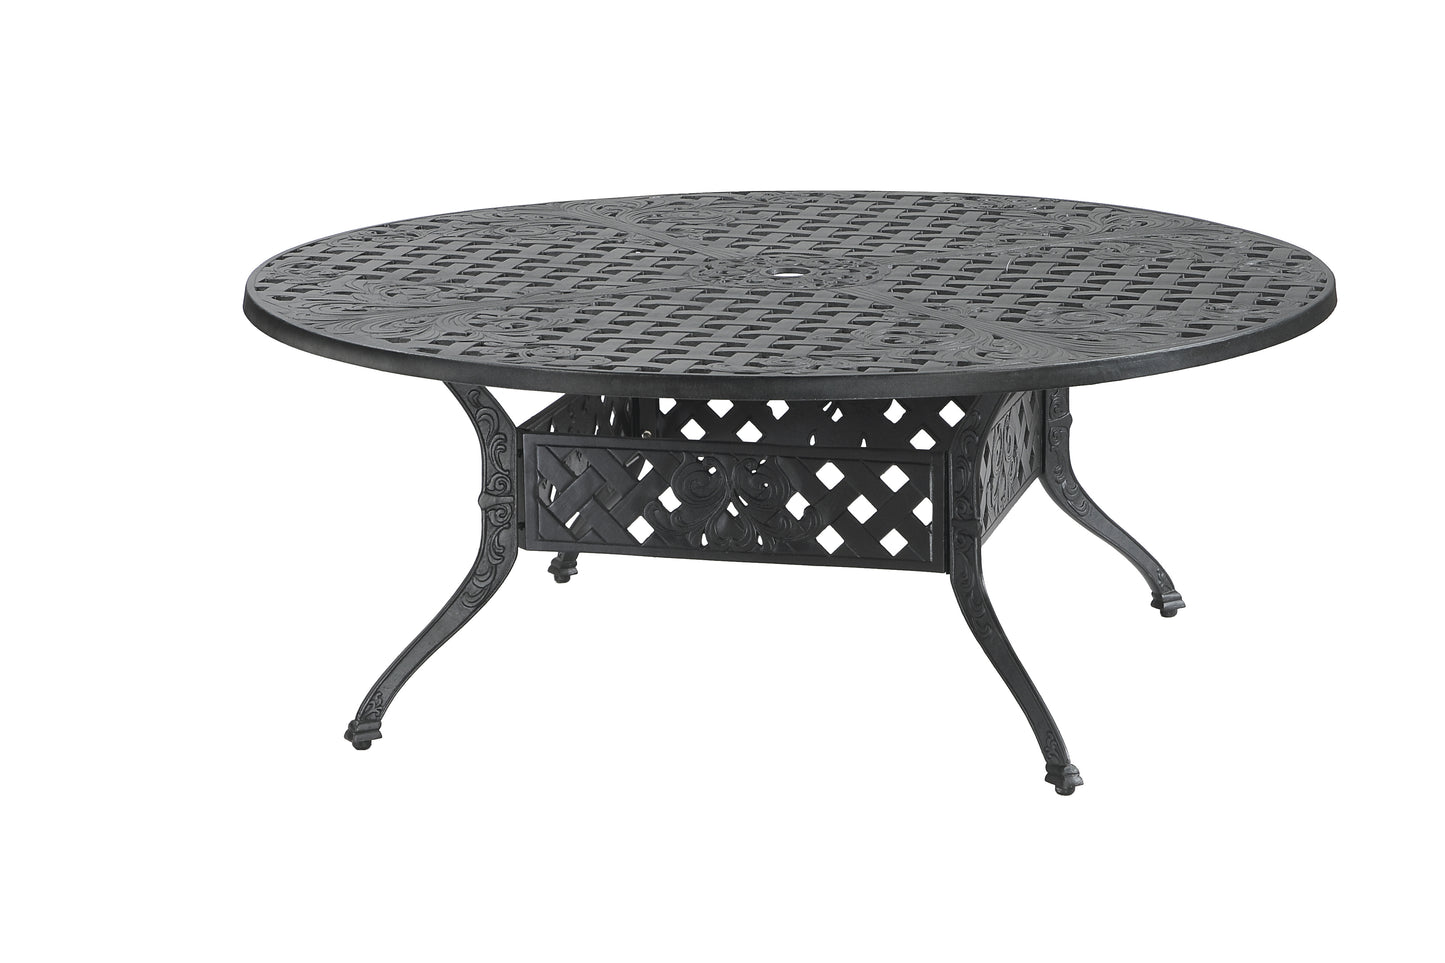 Click to View all Verona Tables & Accessories